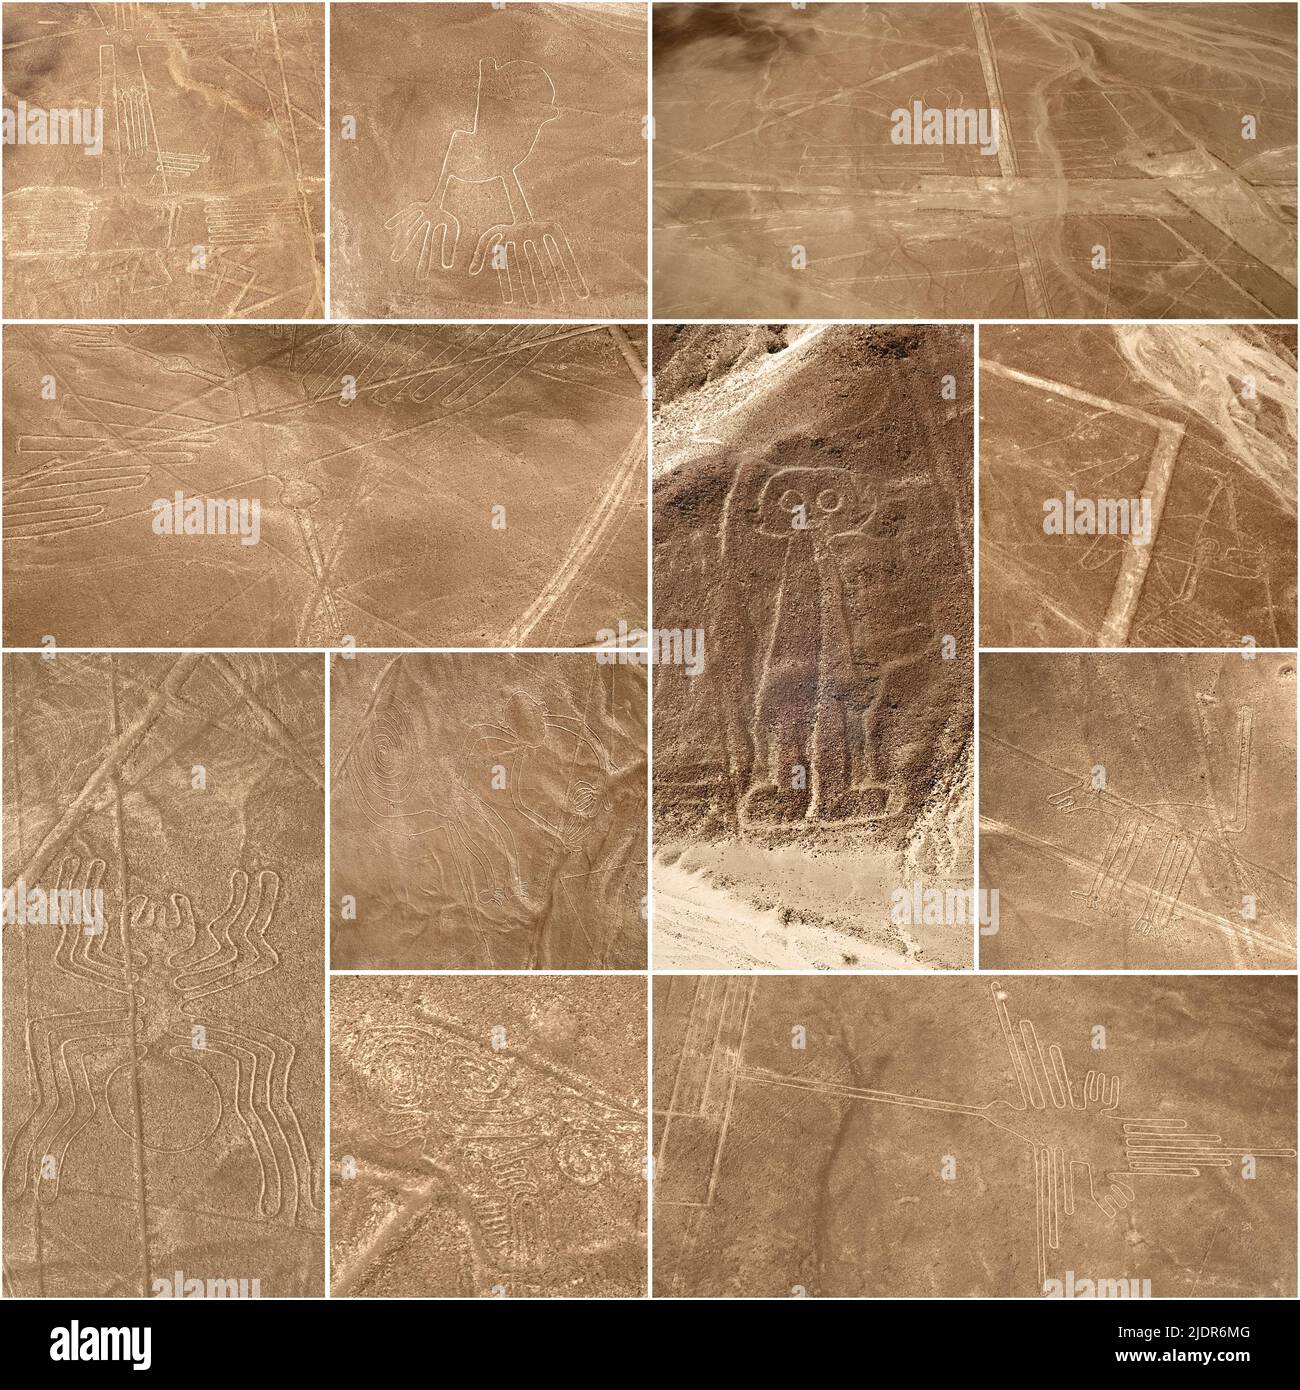 Unesco Heritage: Lines and Geoglyphs of Nazca, Peru - collage (From top left: sea bird, hand, pelican, condor, giant, whale, spider, monkey, dog, scor Stock Photo